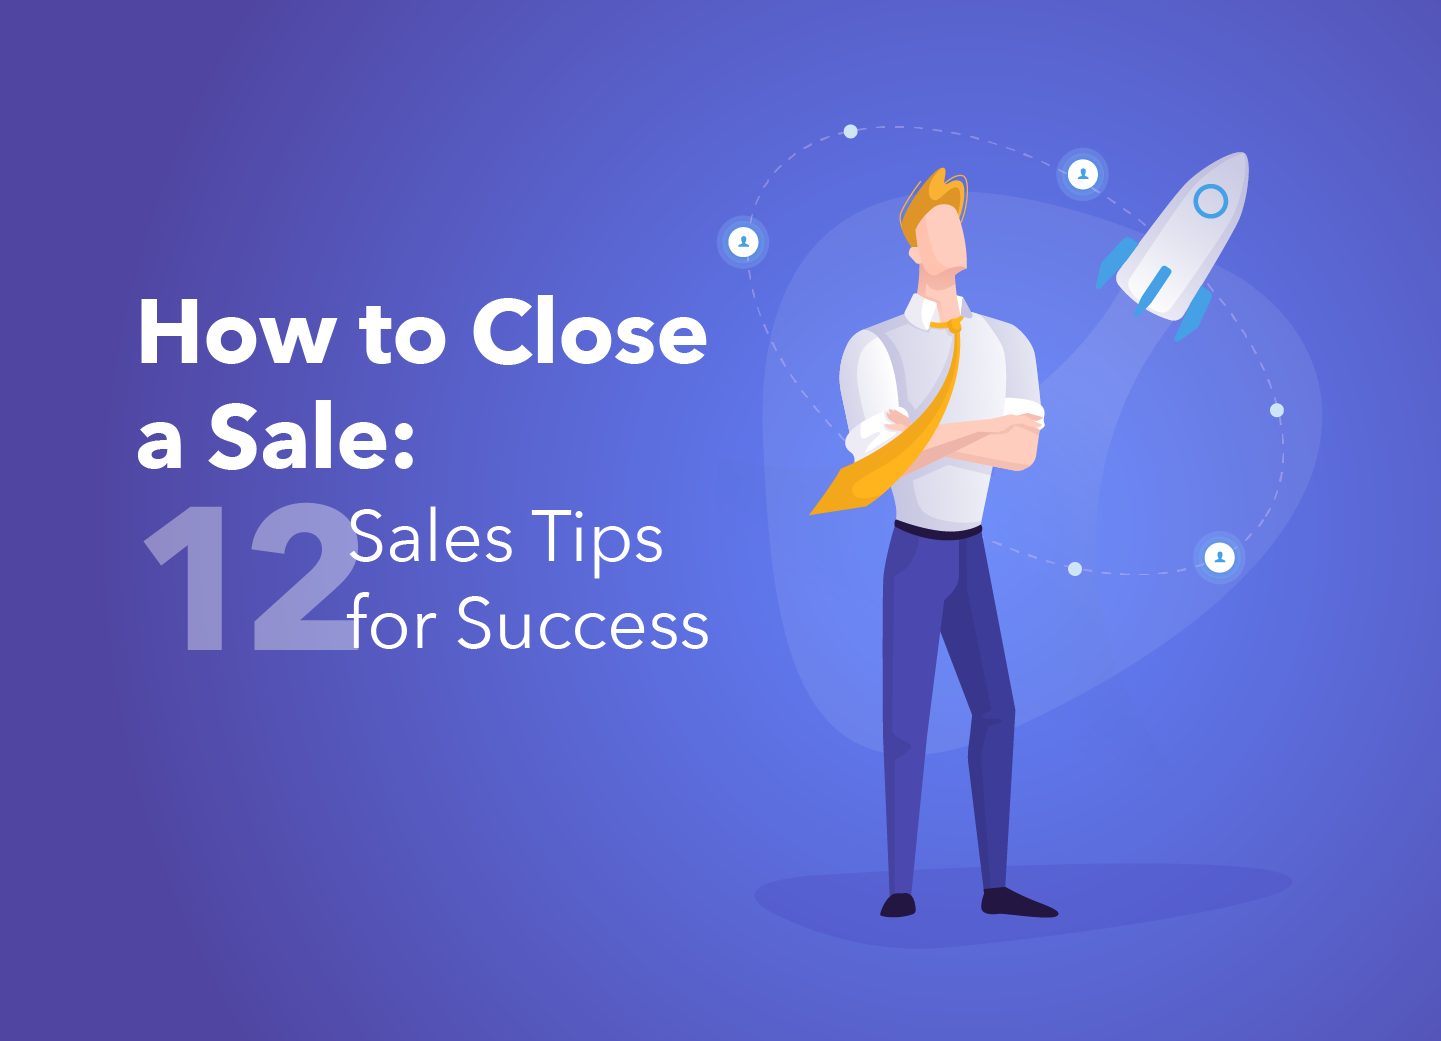 How to Close a Sale: 12 Sales Tips for Success [Infographic]